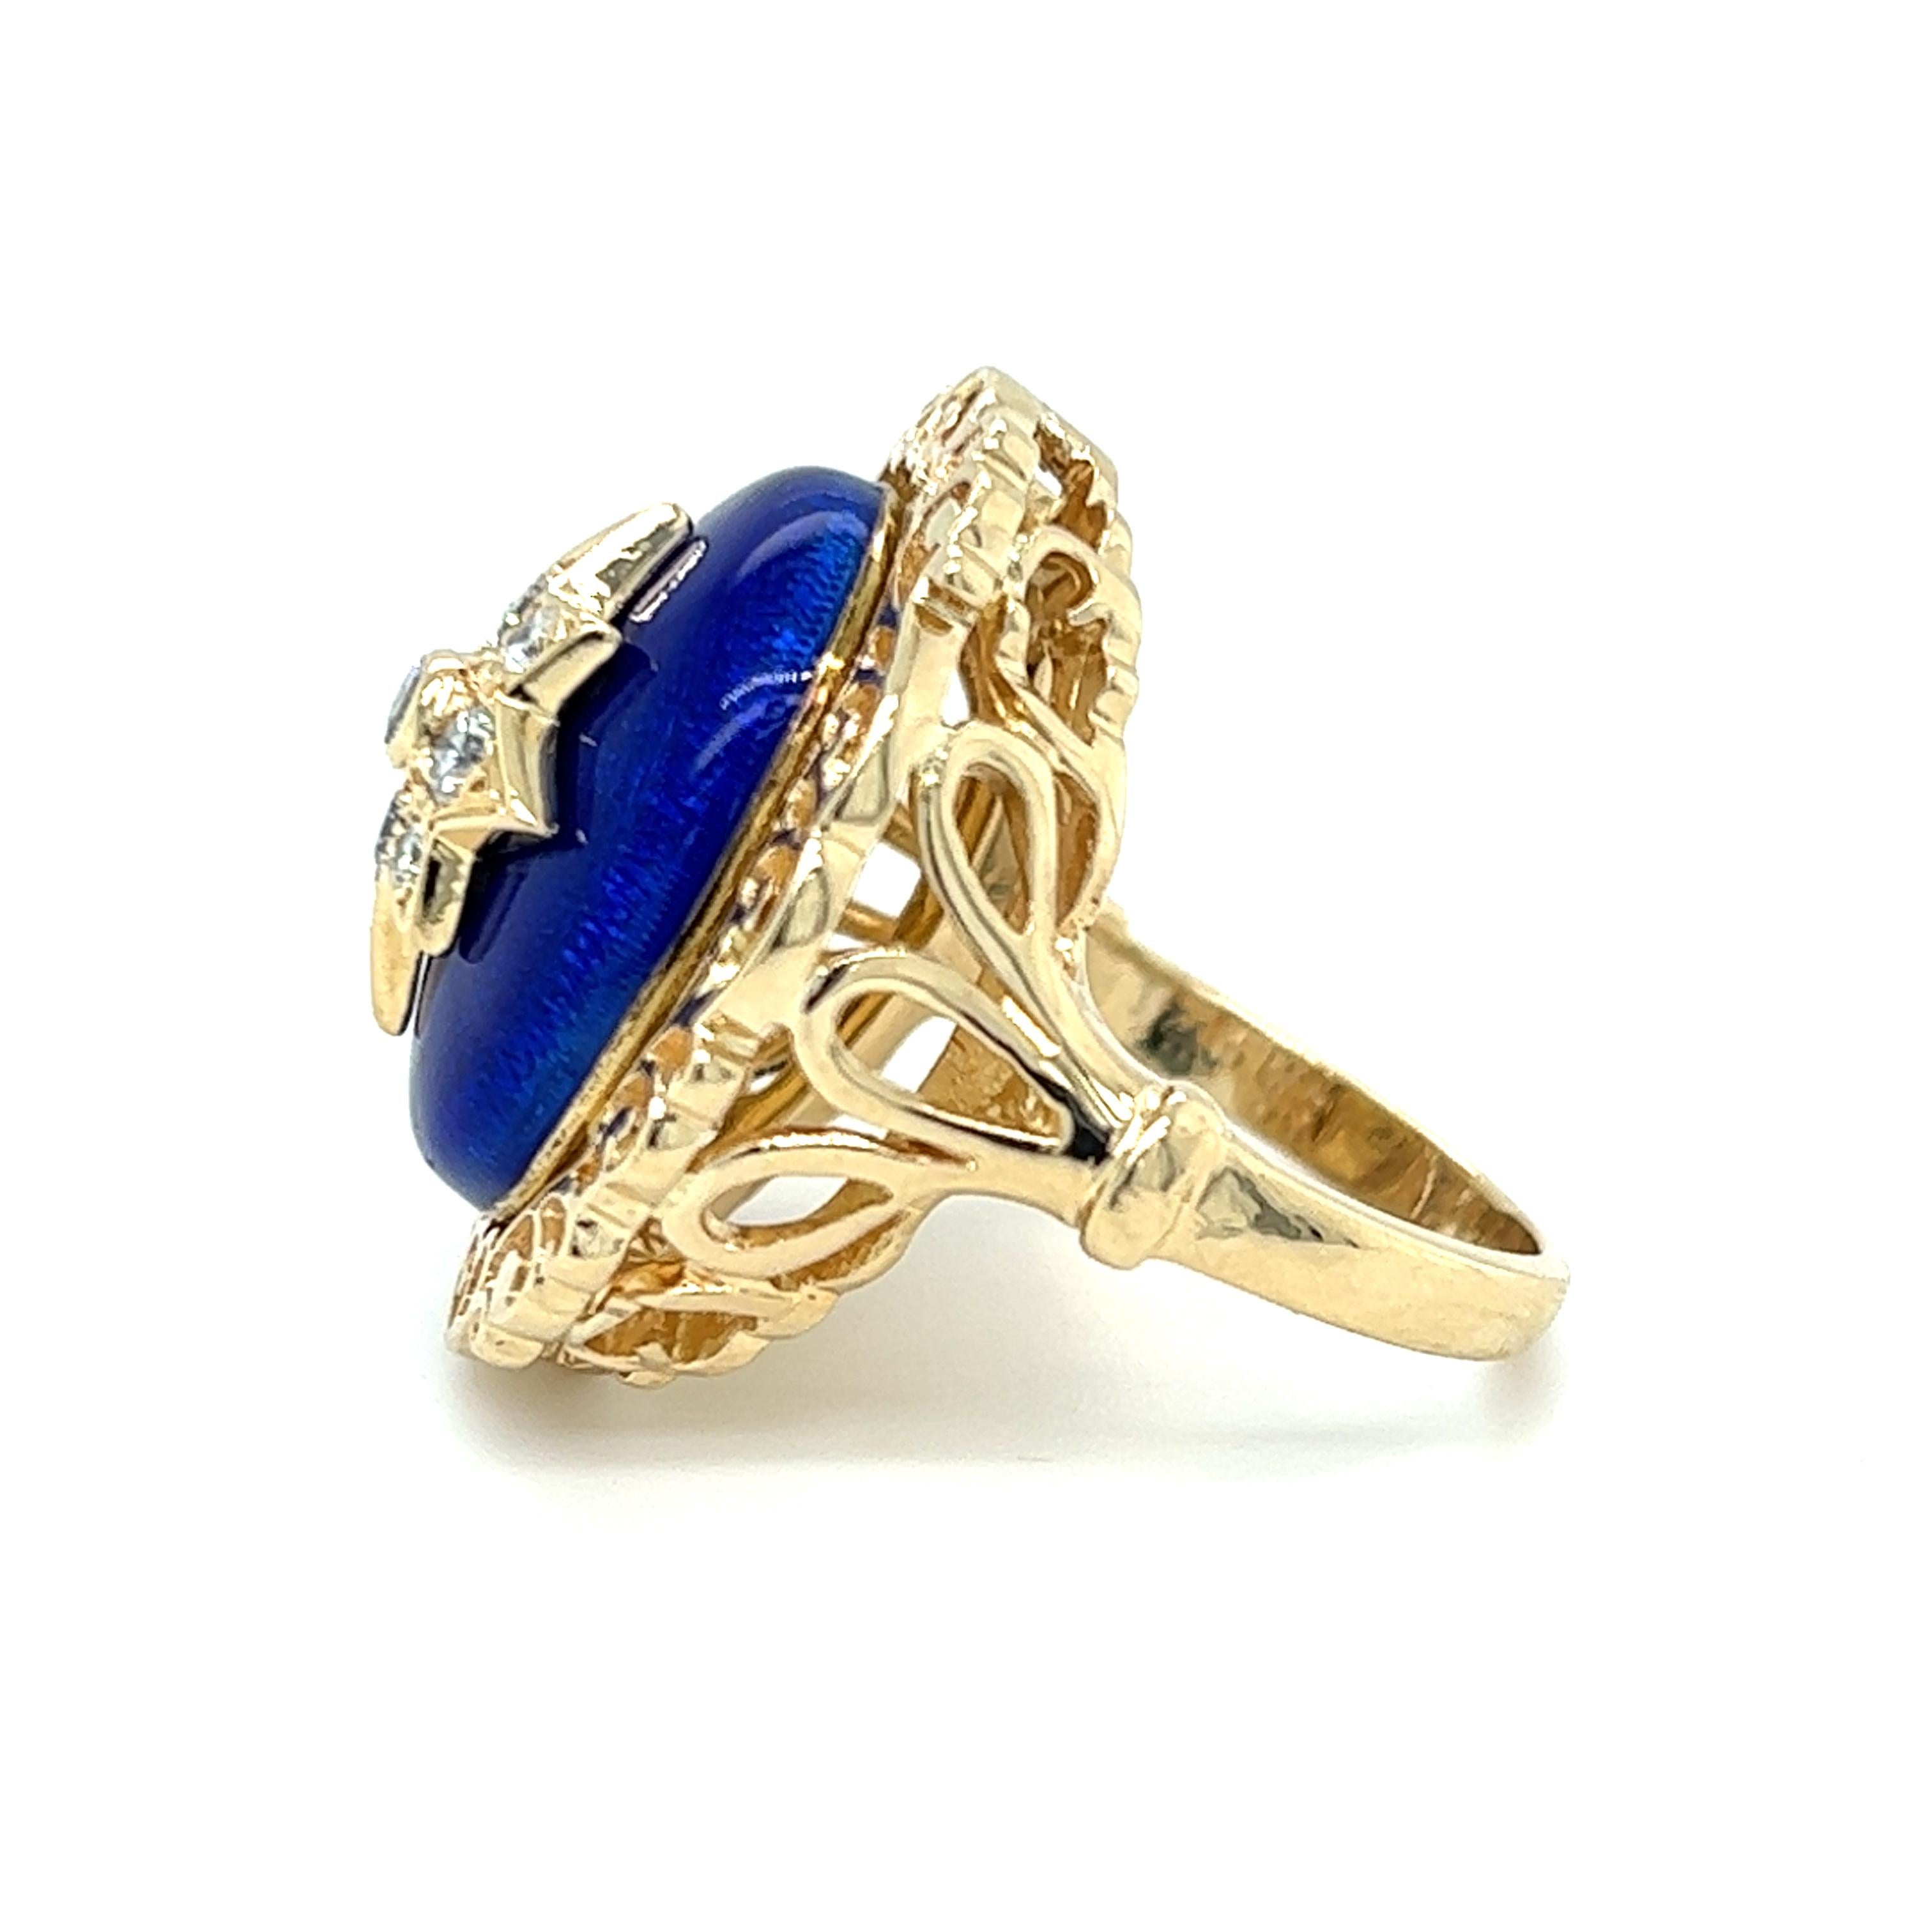 One 14 karat yellow gold cobalt blue enamel oval dome ring, designed by K. Goldschmidt The ring is set with nine (9) brilliant cut diamonds, approximately 0.25 carat total weight with matching H/I color and SI1 clarity. The ring is stamped 14KP with